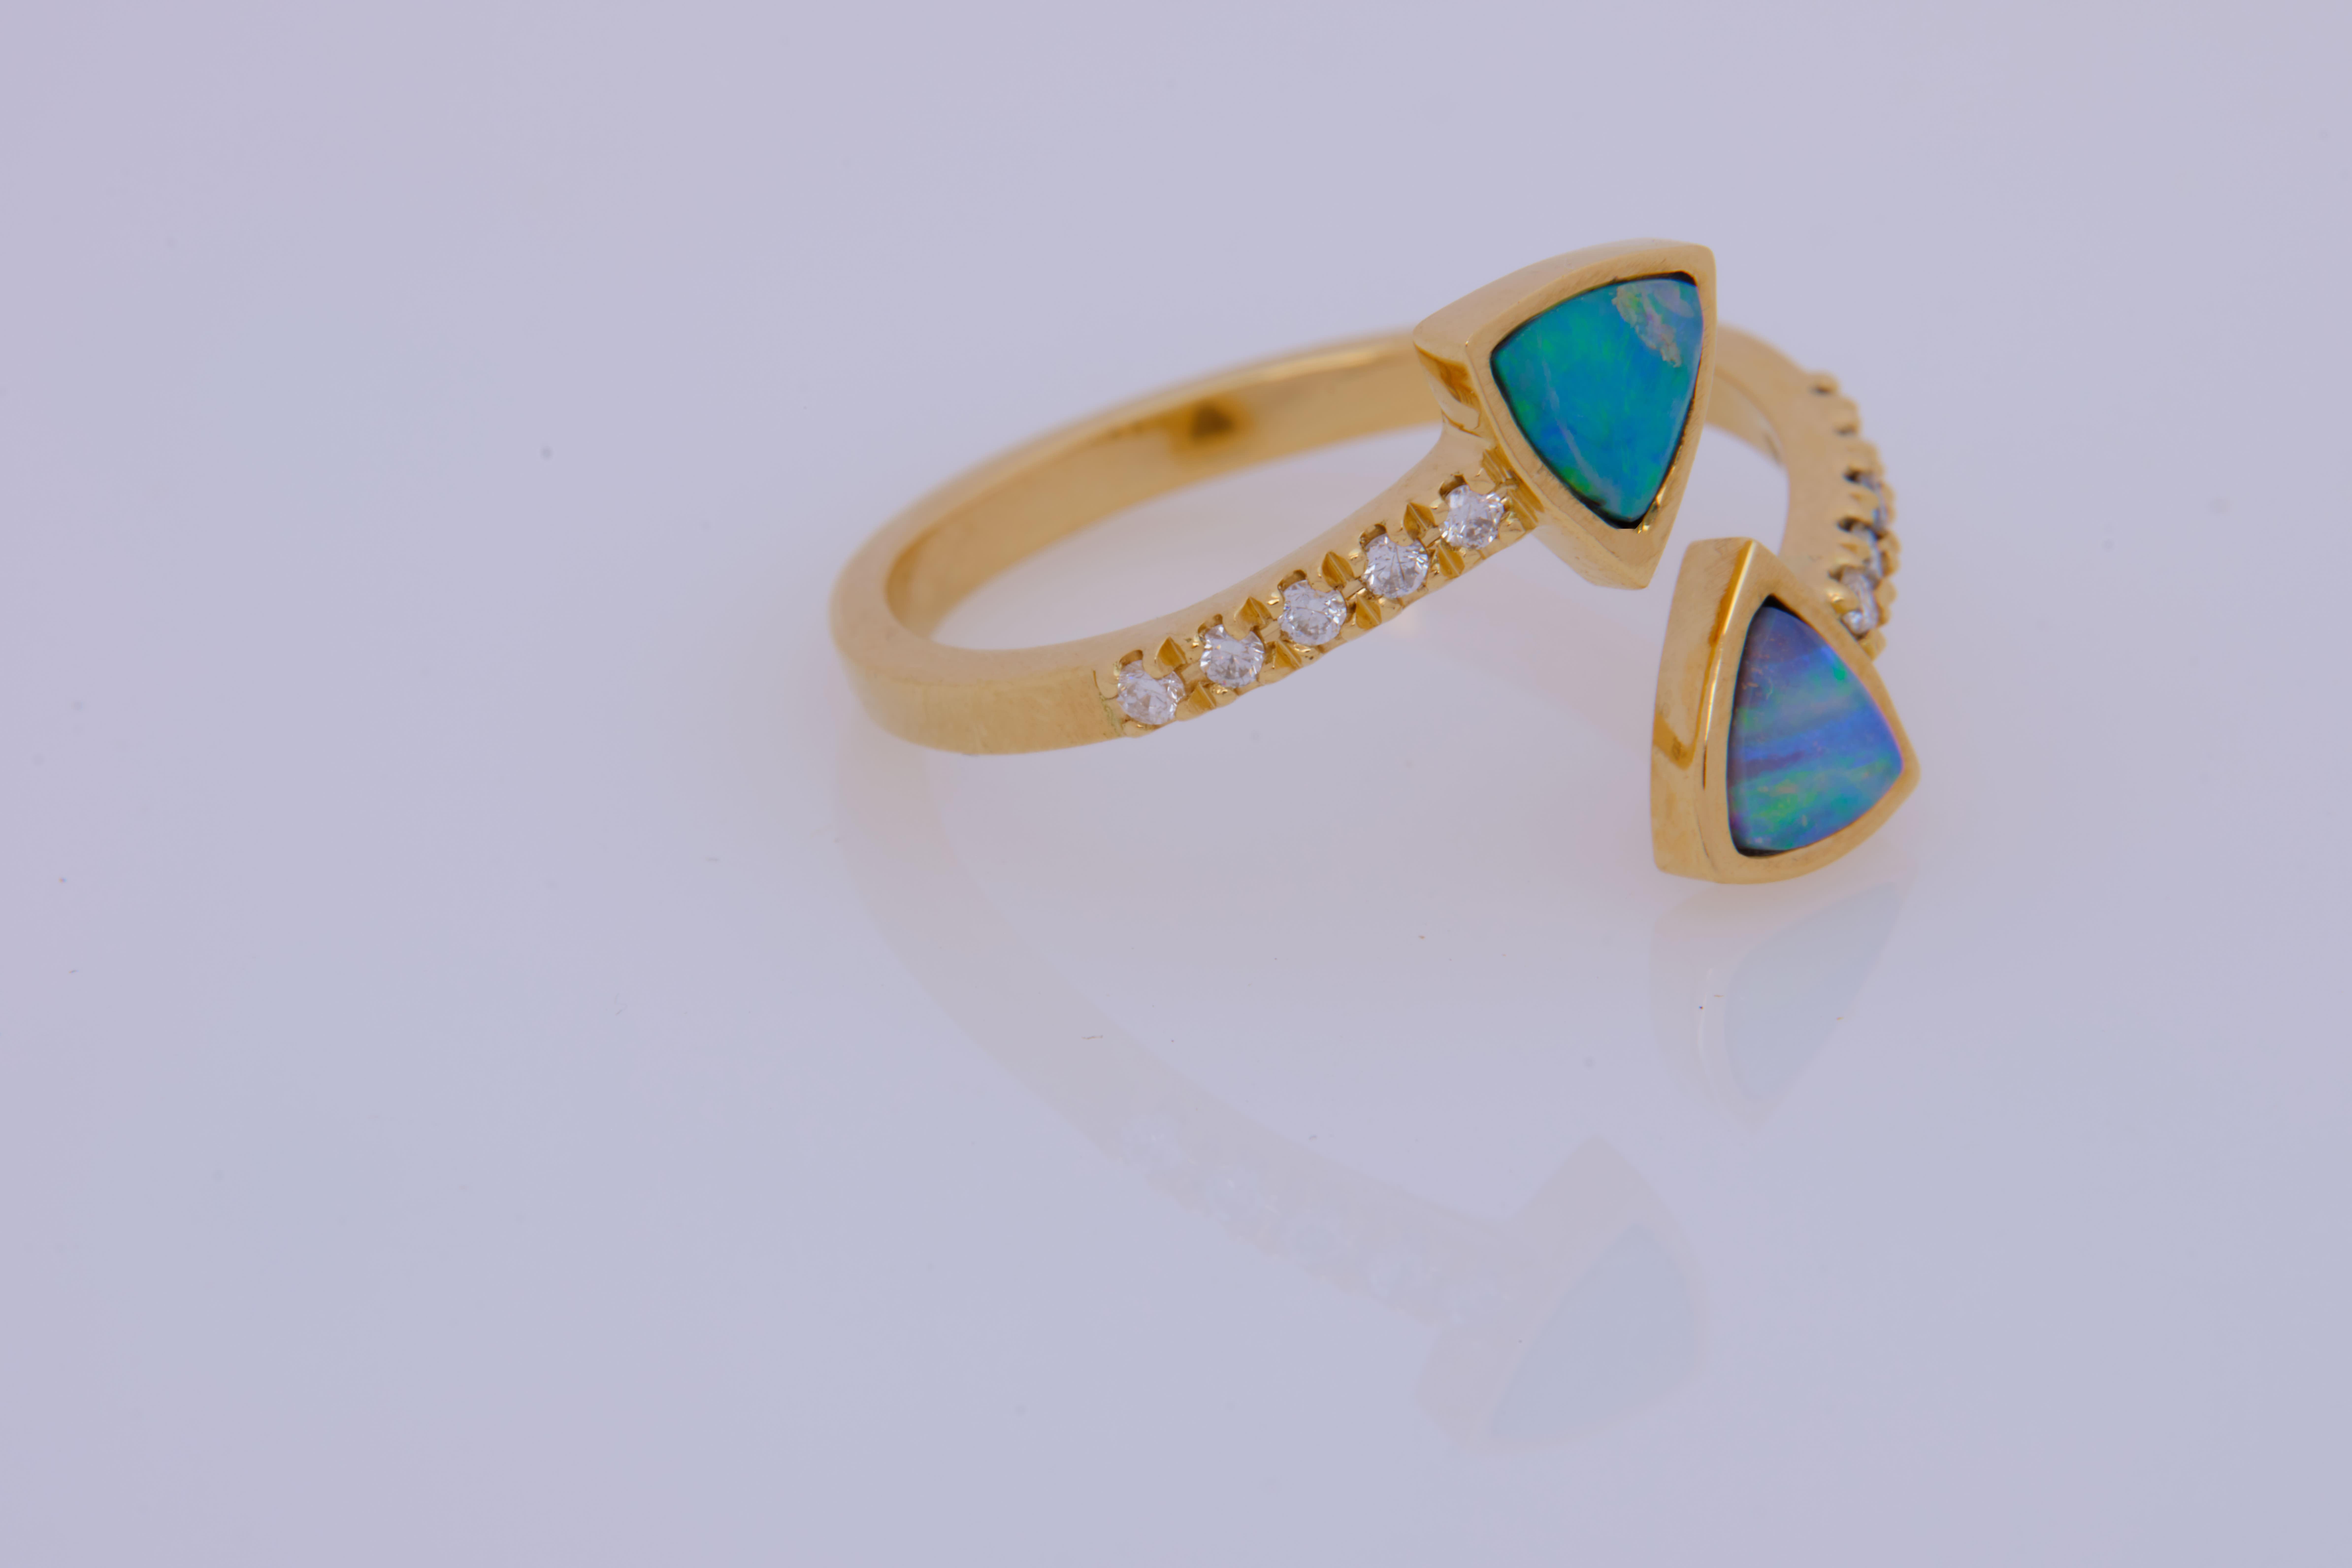 ONE OF A KIND
Enigmatic boulder opals ready to be with you 24/7.
Comfortable, elegance and distinct jewel that show up your personality.

•	Size 54 (EU)  7(US), 17,1 mm
•	Size can be alterated to fit

•	18 Karat Recycled Yellow Gold 
•	Weight: